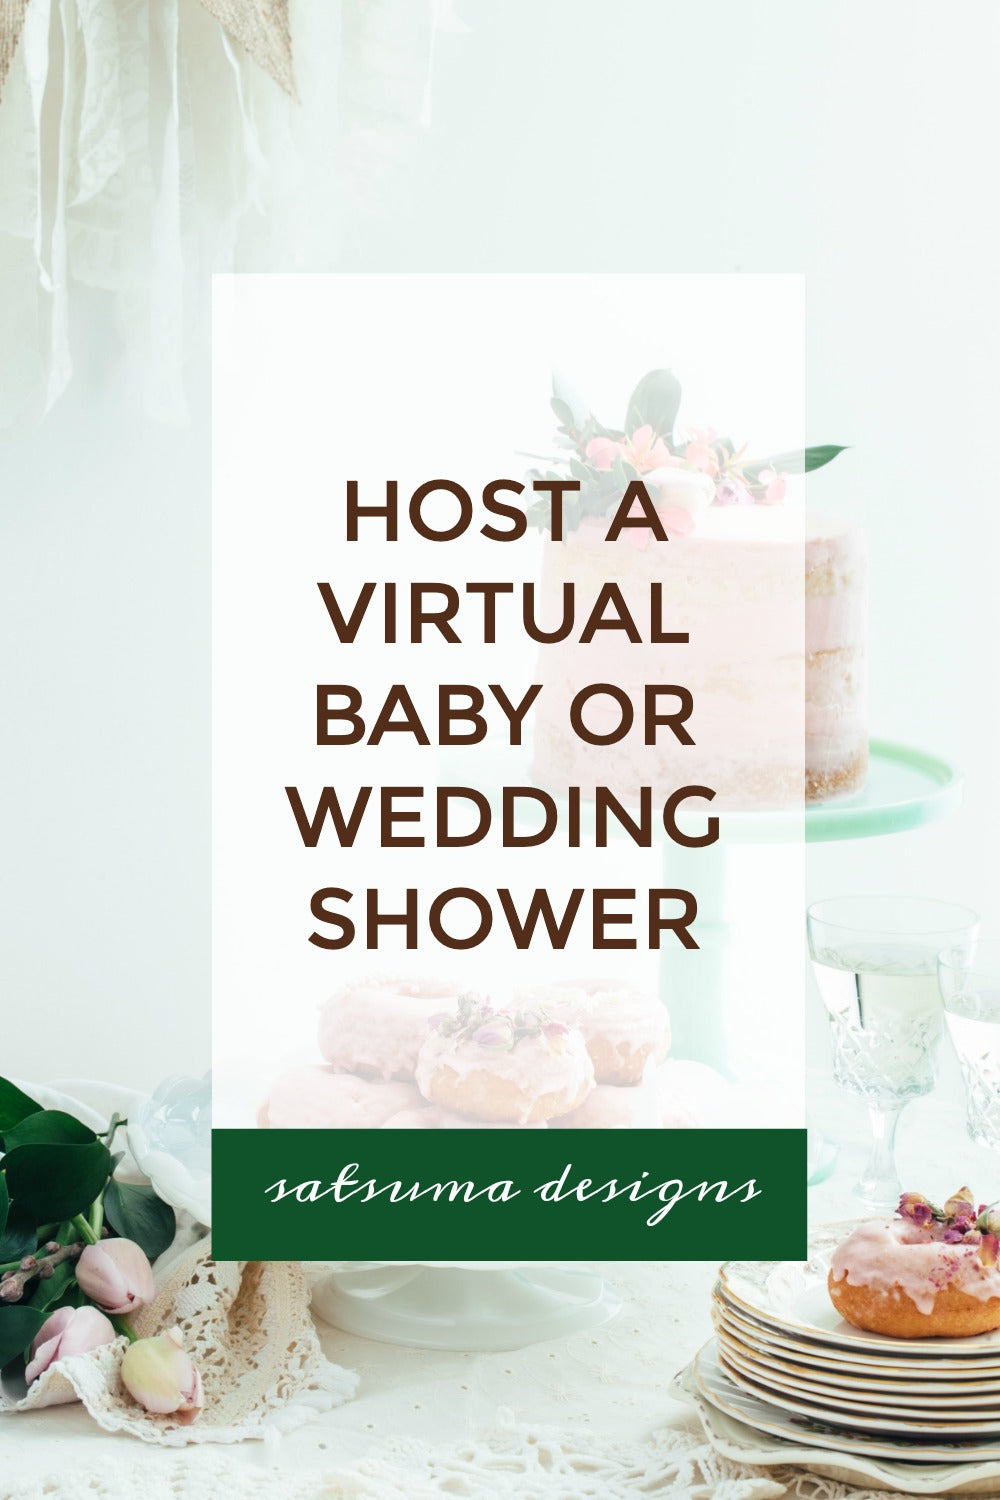 How to Host a Virtual Baby or Wedding Shower